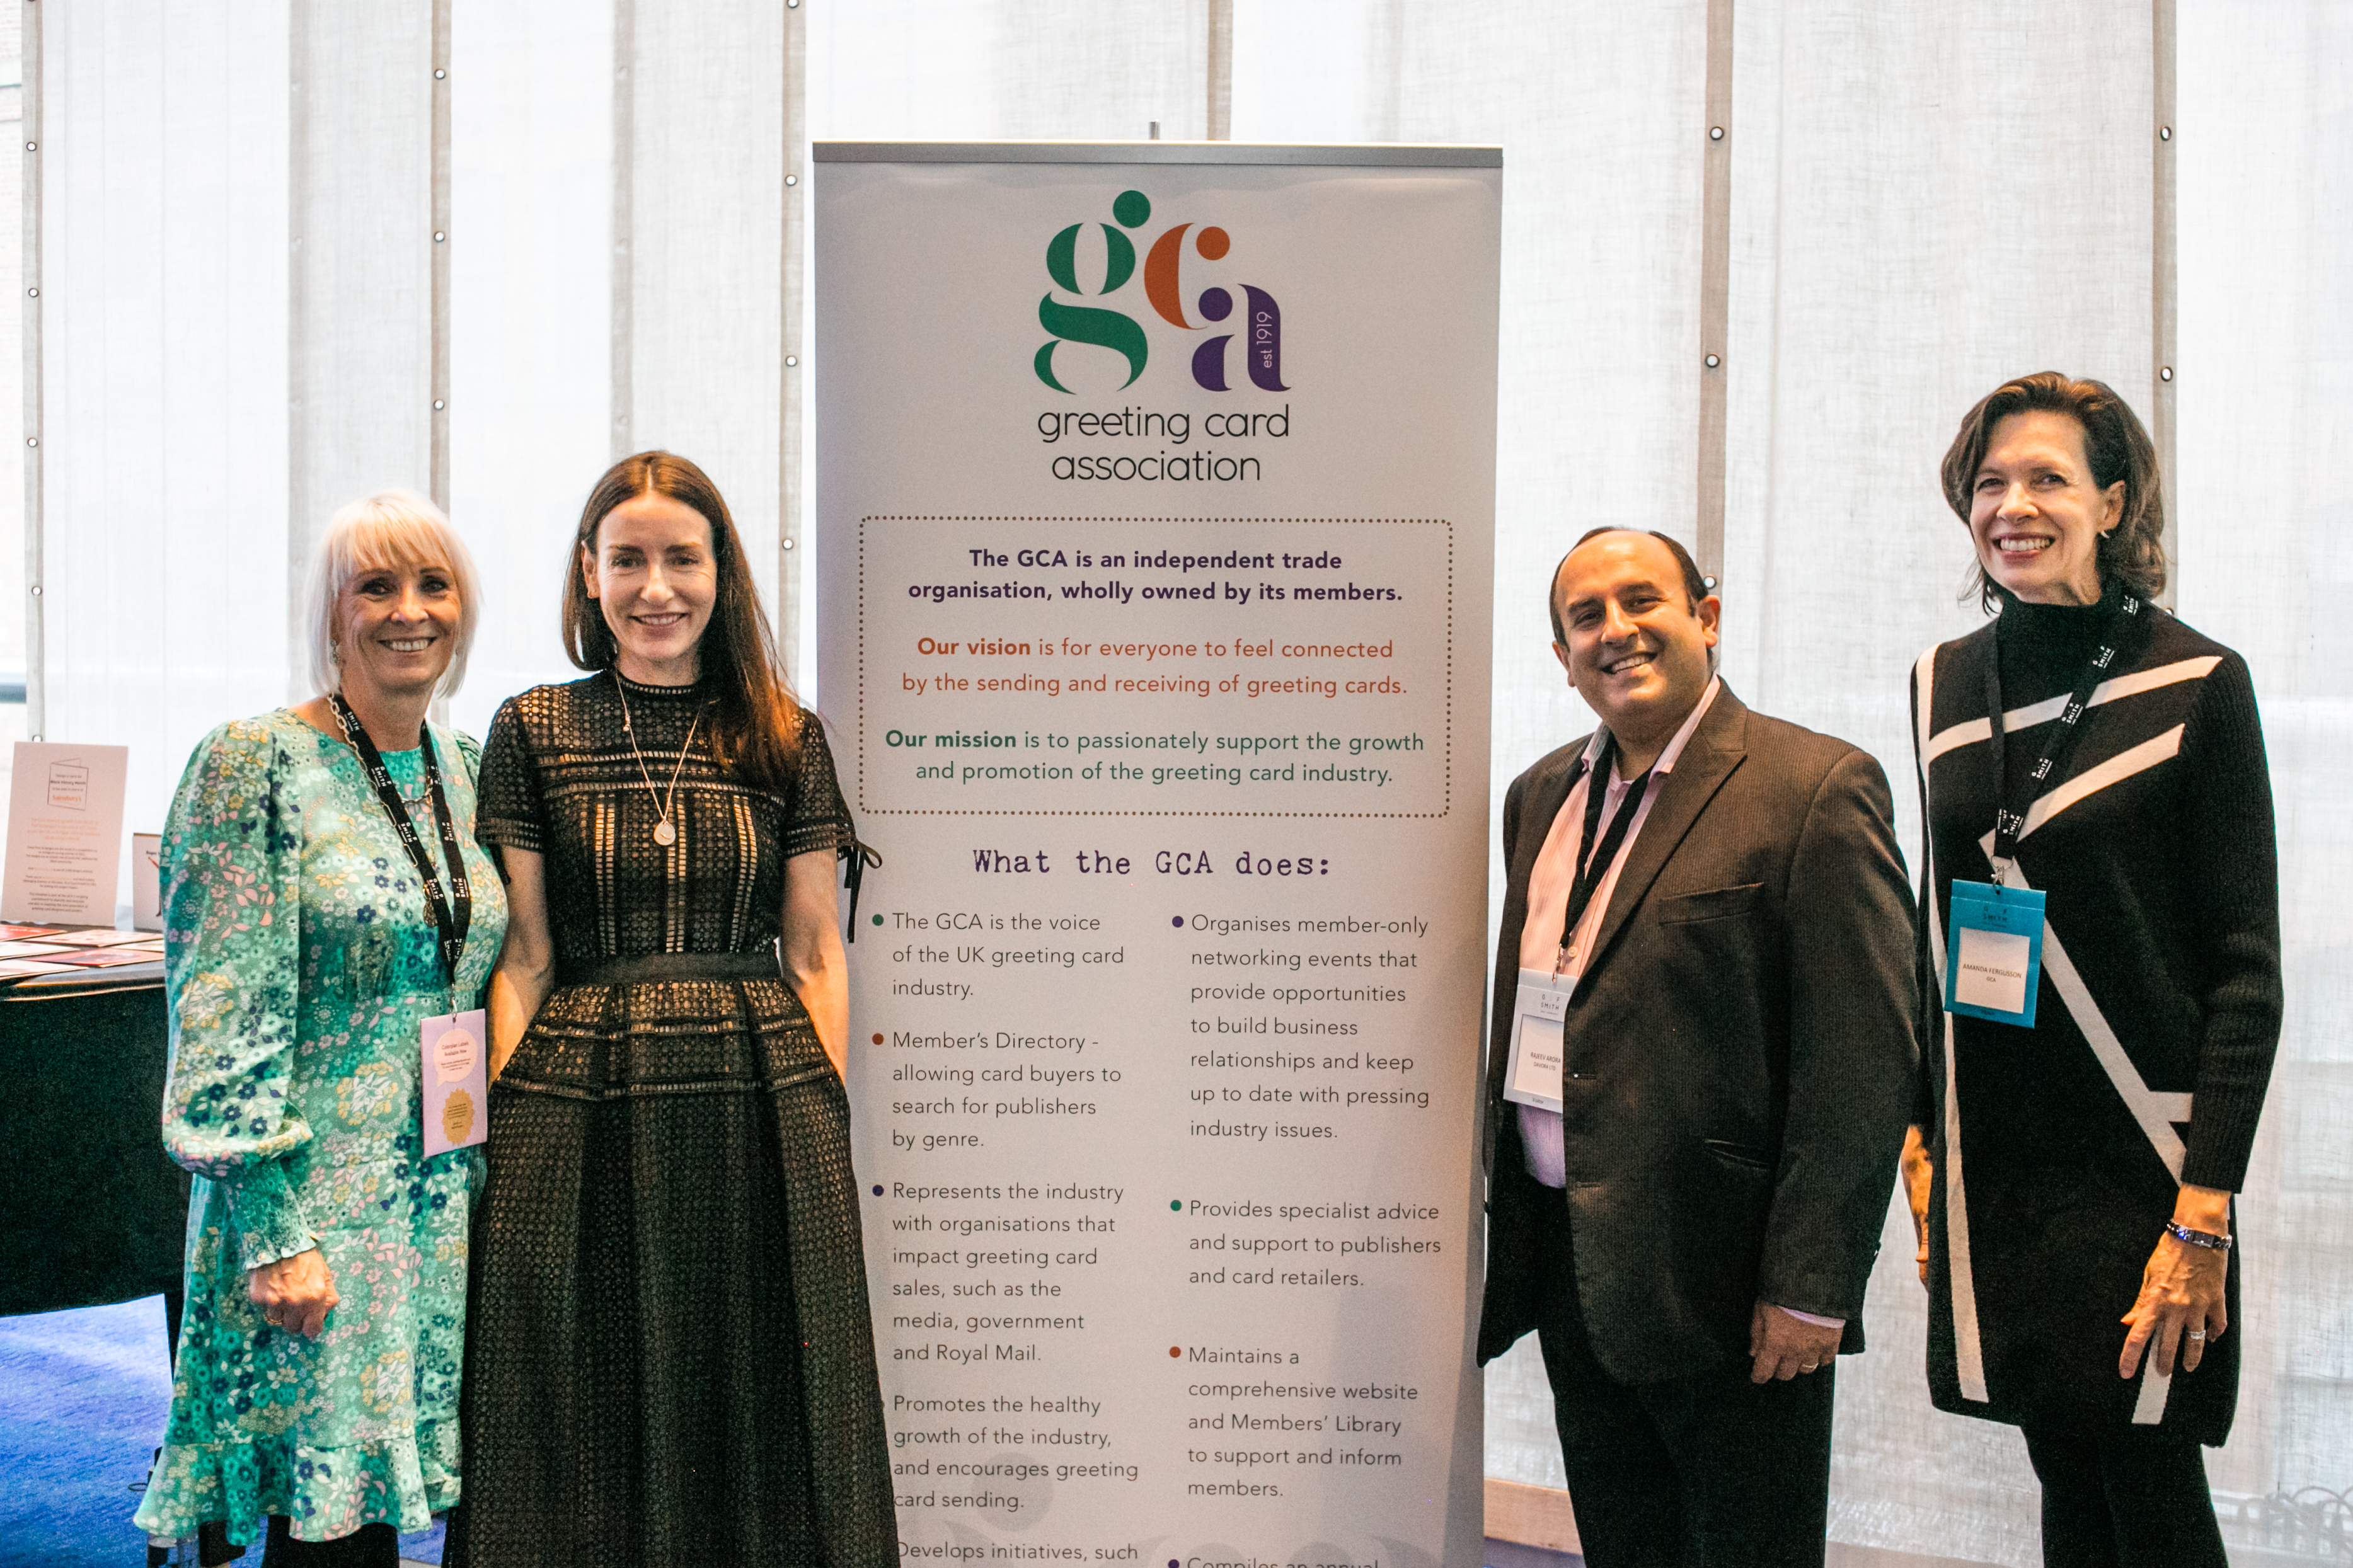 Above: GCA Council members (left-right) Karen Wilson (Paper Salad), Rachel Hare (Belly Button Designs) and Raj Arora with GCA’s ceo Amanda Fergusson at the most recent GCA AGM and Conference which took place in Manchester.